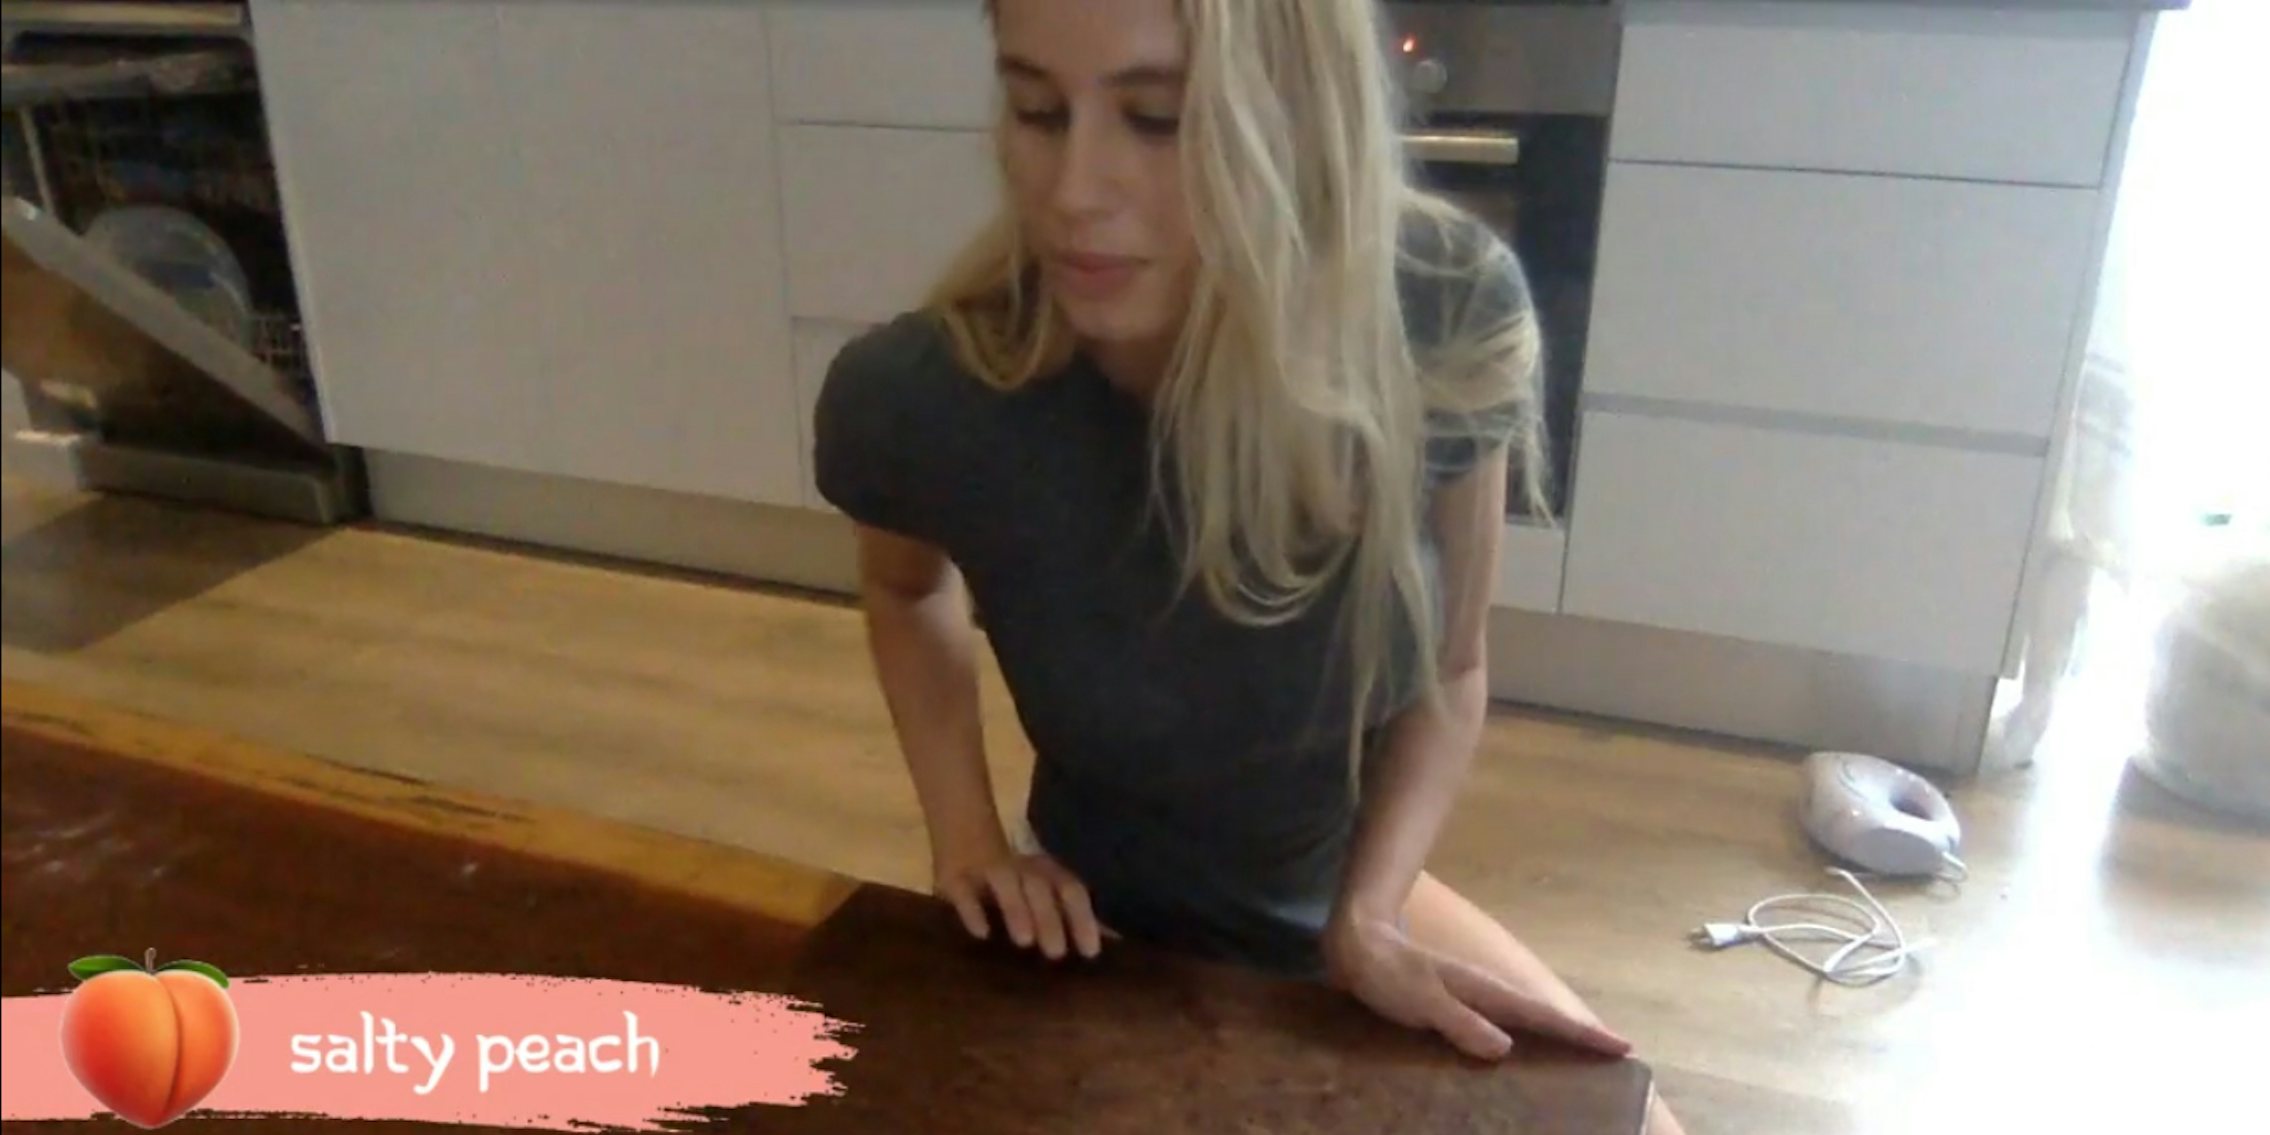 Sweetsaltypeach banned on Twitch